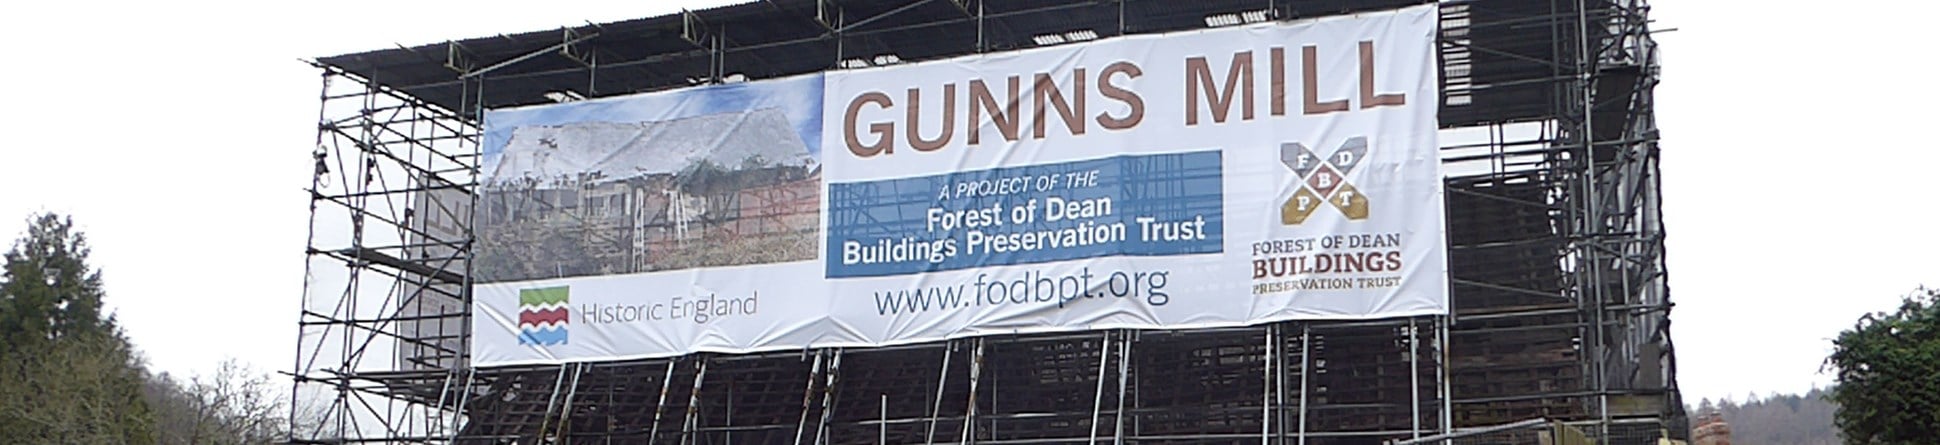 A photograph of a historic mill building entirely protected with scaffolding, showing a banner with the words 'Gunns Mill'.